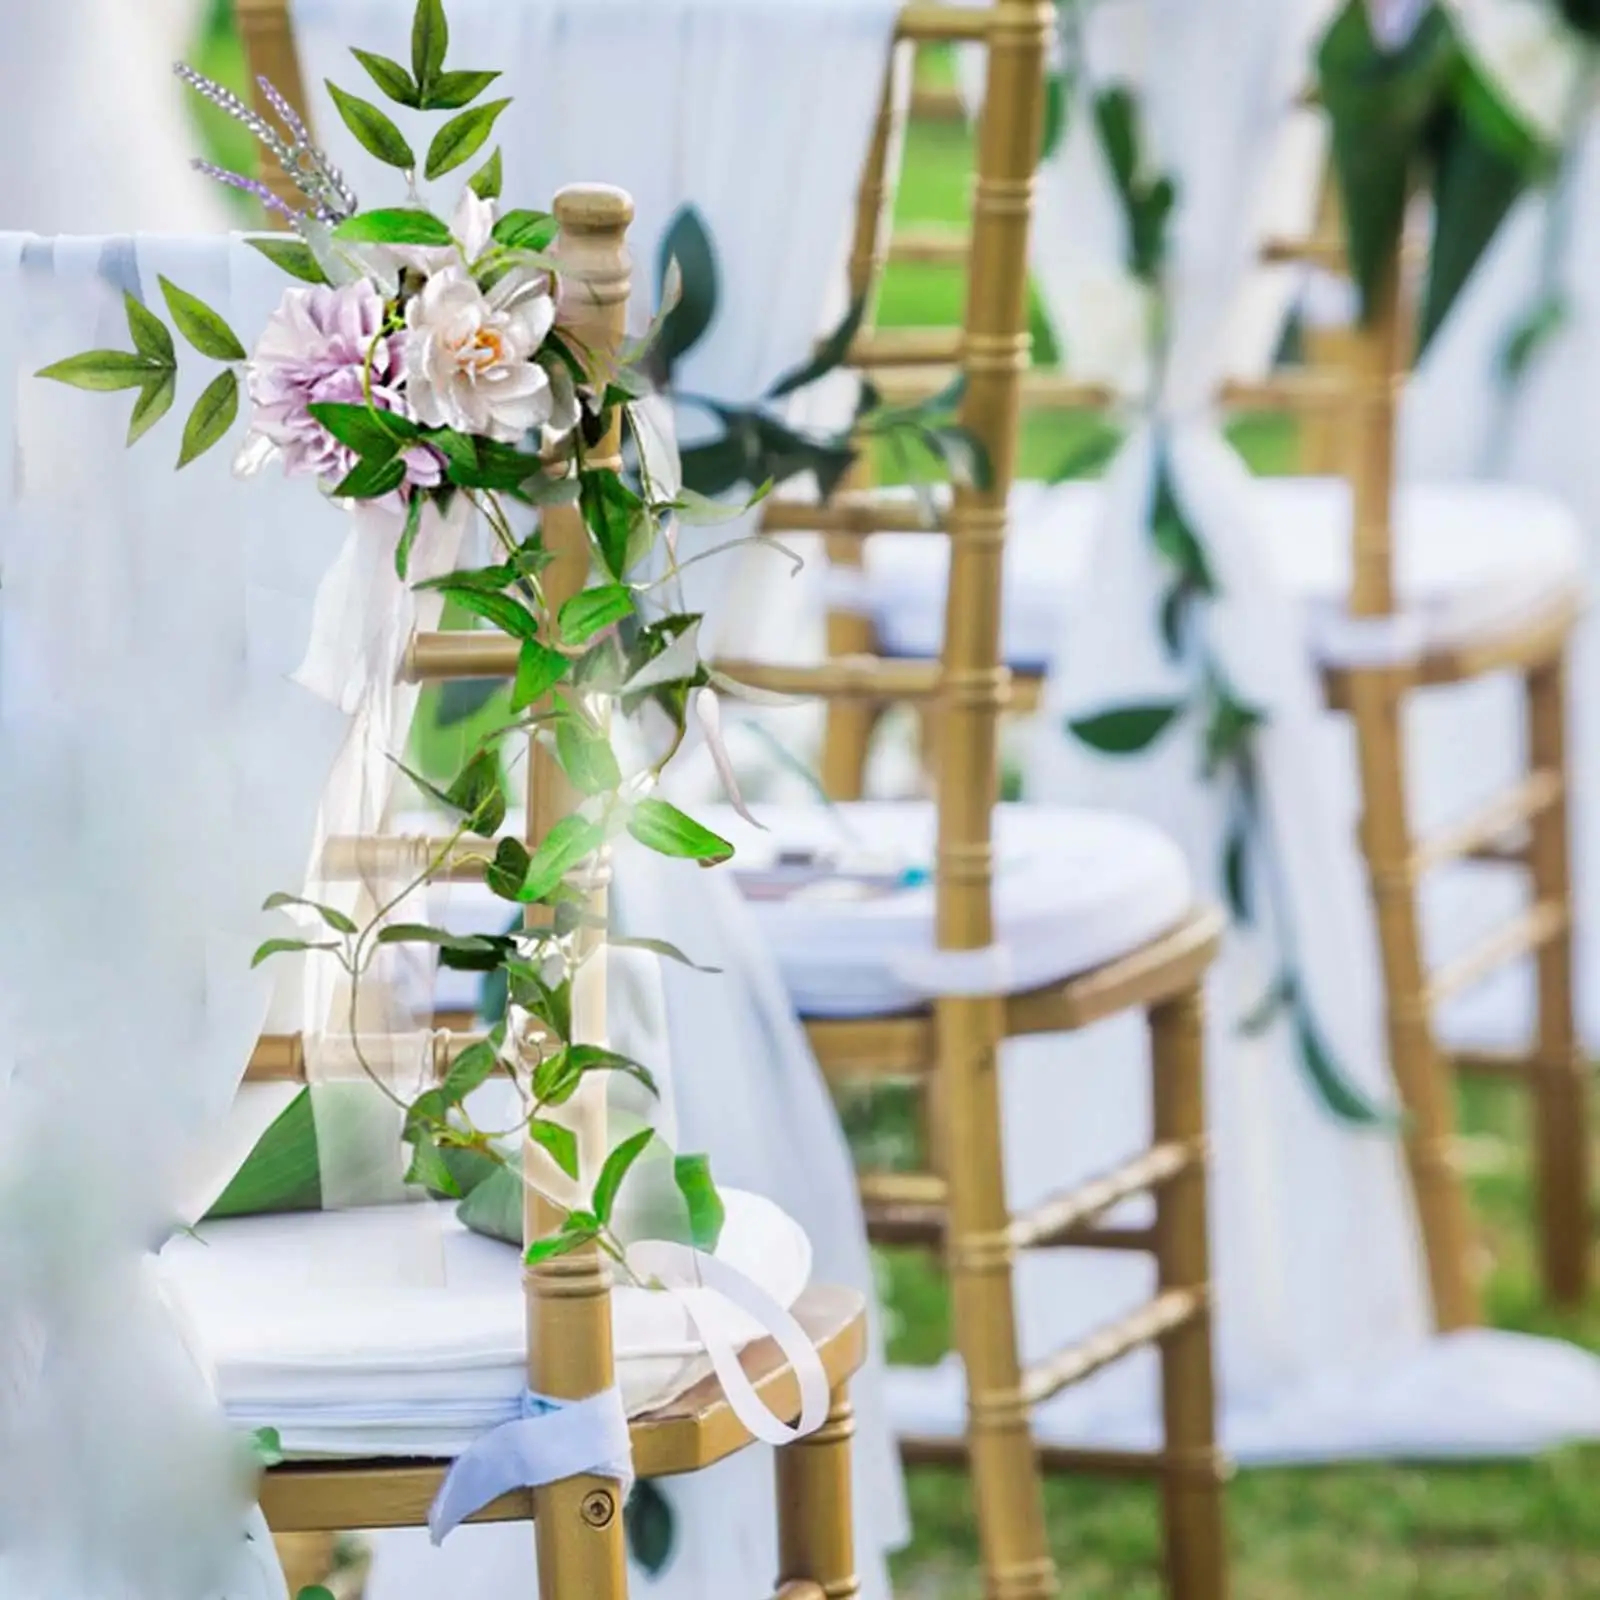 Wedding Aisle Decorations Chair Decorations Rose Floral Chair Bench Flowers for Wedding Arch Ceremony Holiday Backdrop Decor